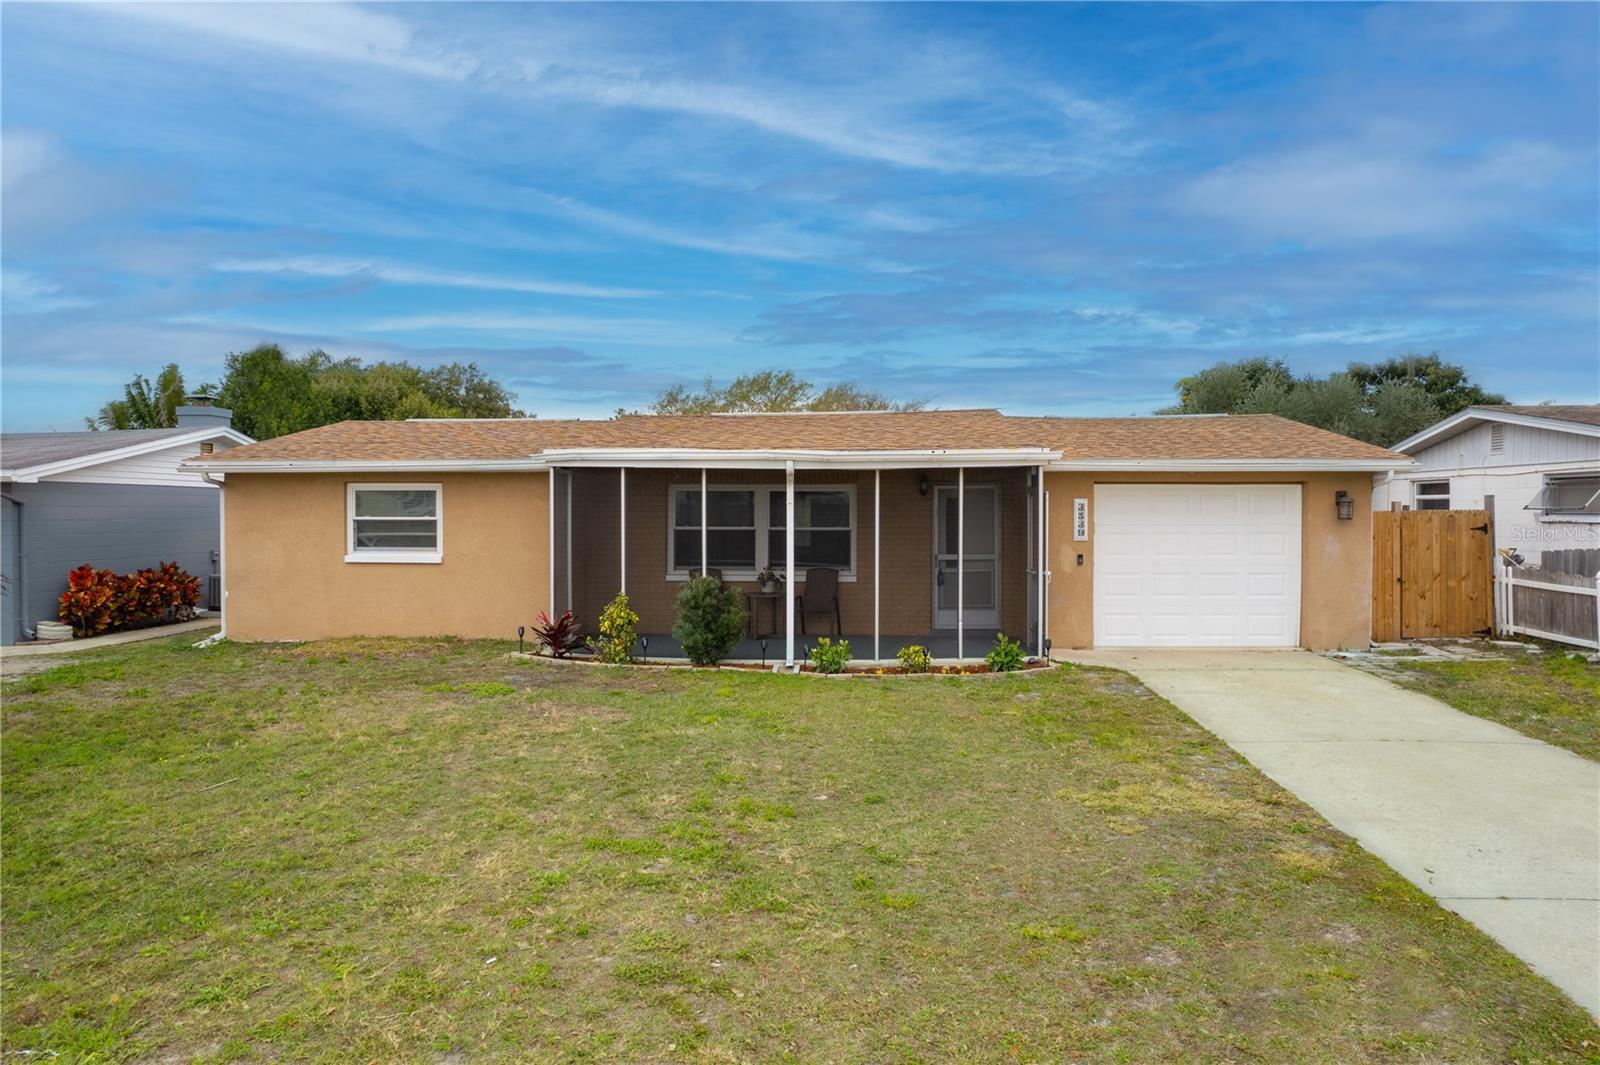 Photo one of 3539 Colonial Hills Dr New Port Richey FL 34652 | MLS T3504207